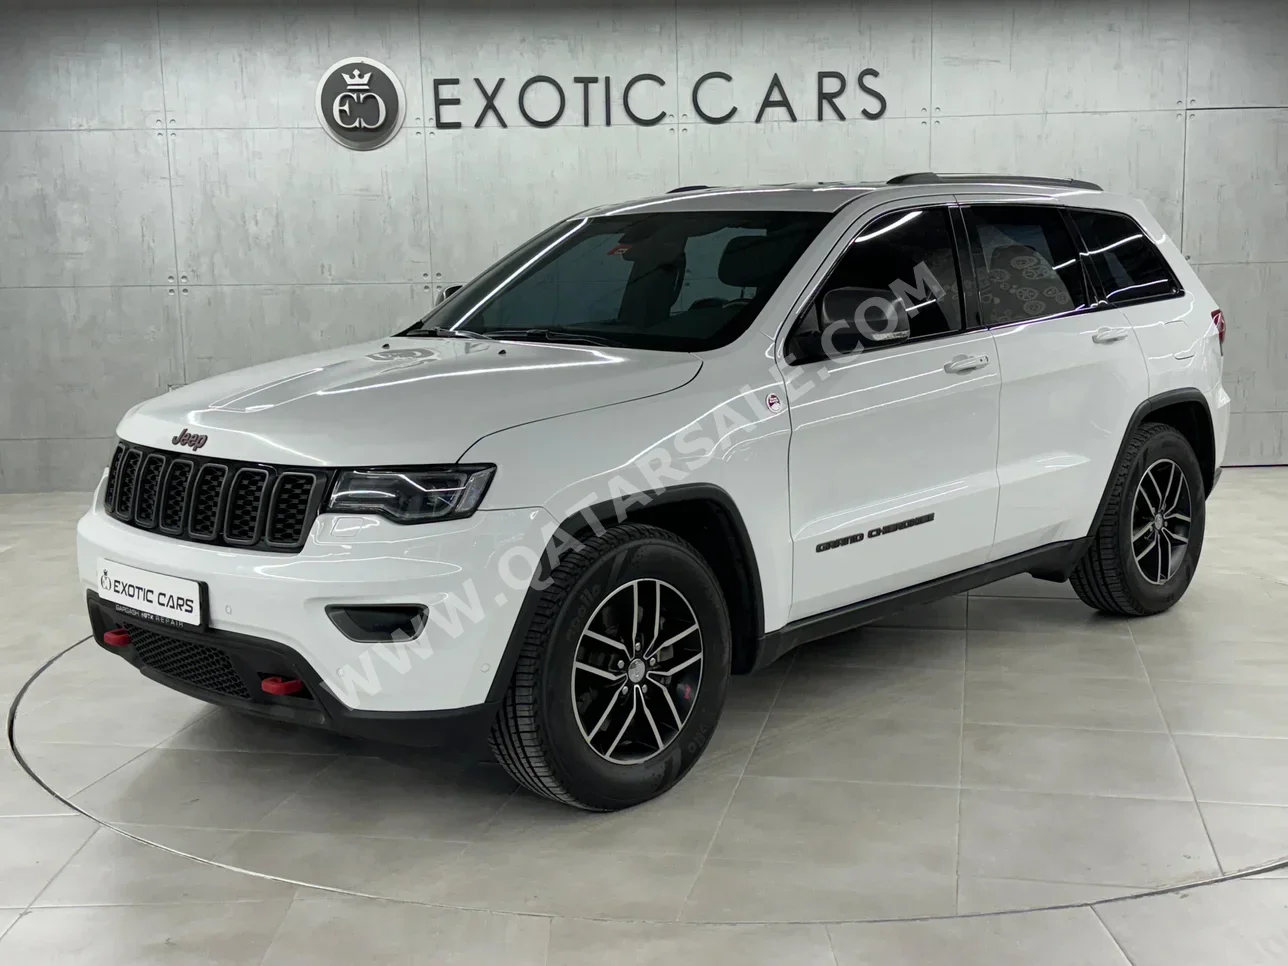 Jeep  Grand Cherokee  trail hock  2017  Automatic  130,000 Km  6 Cylinder  Four Wheel Drive (4WD)  SUV  White